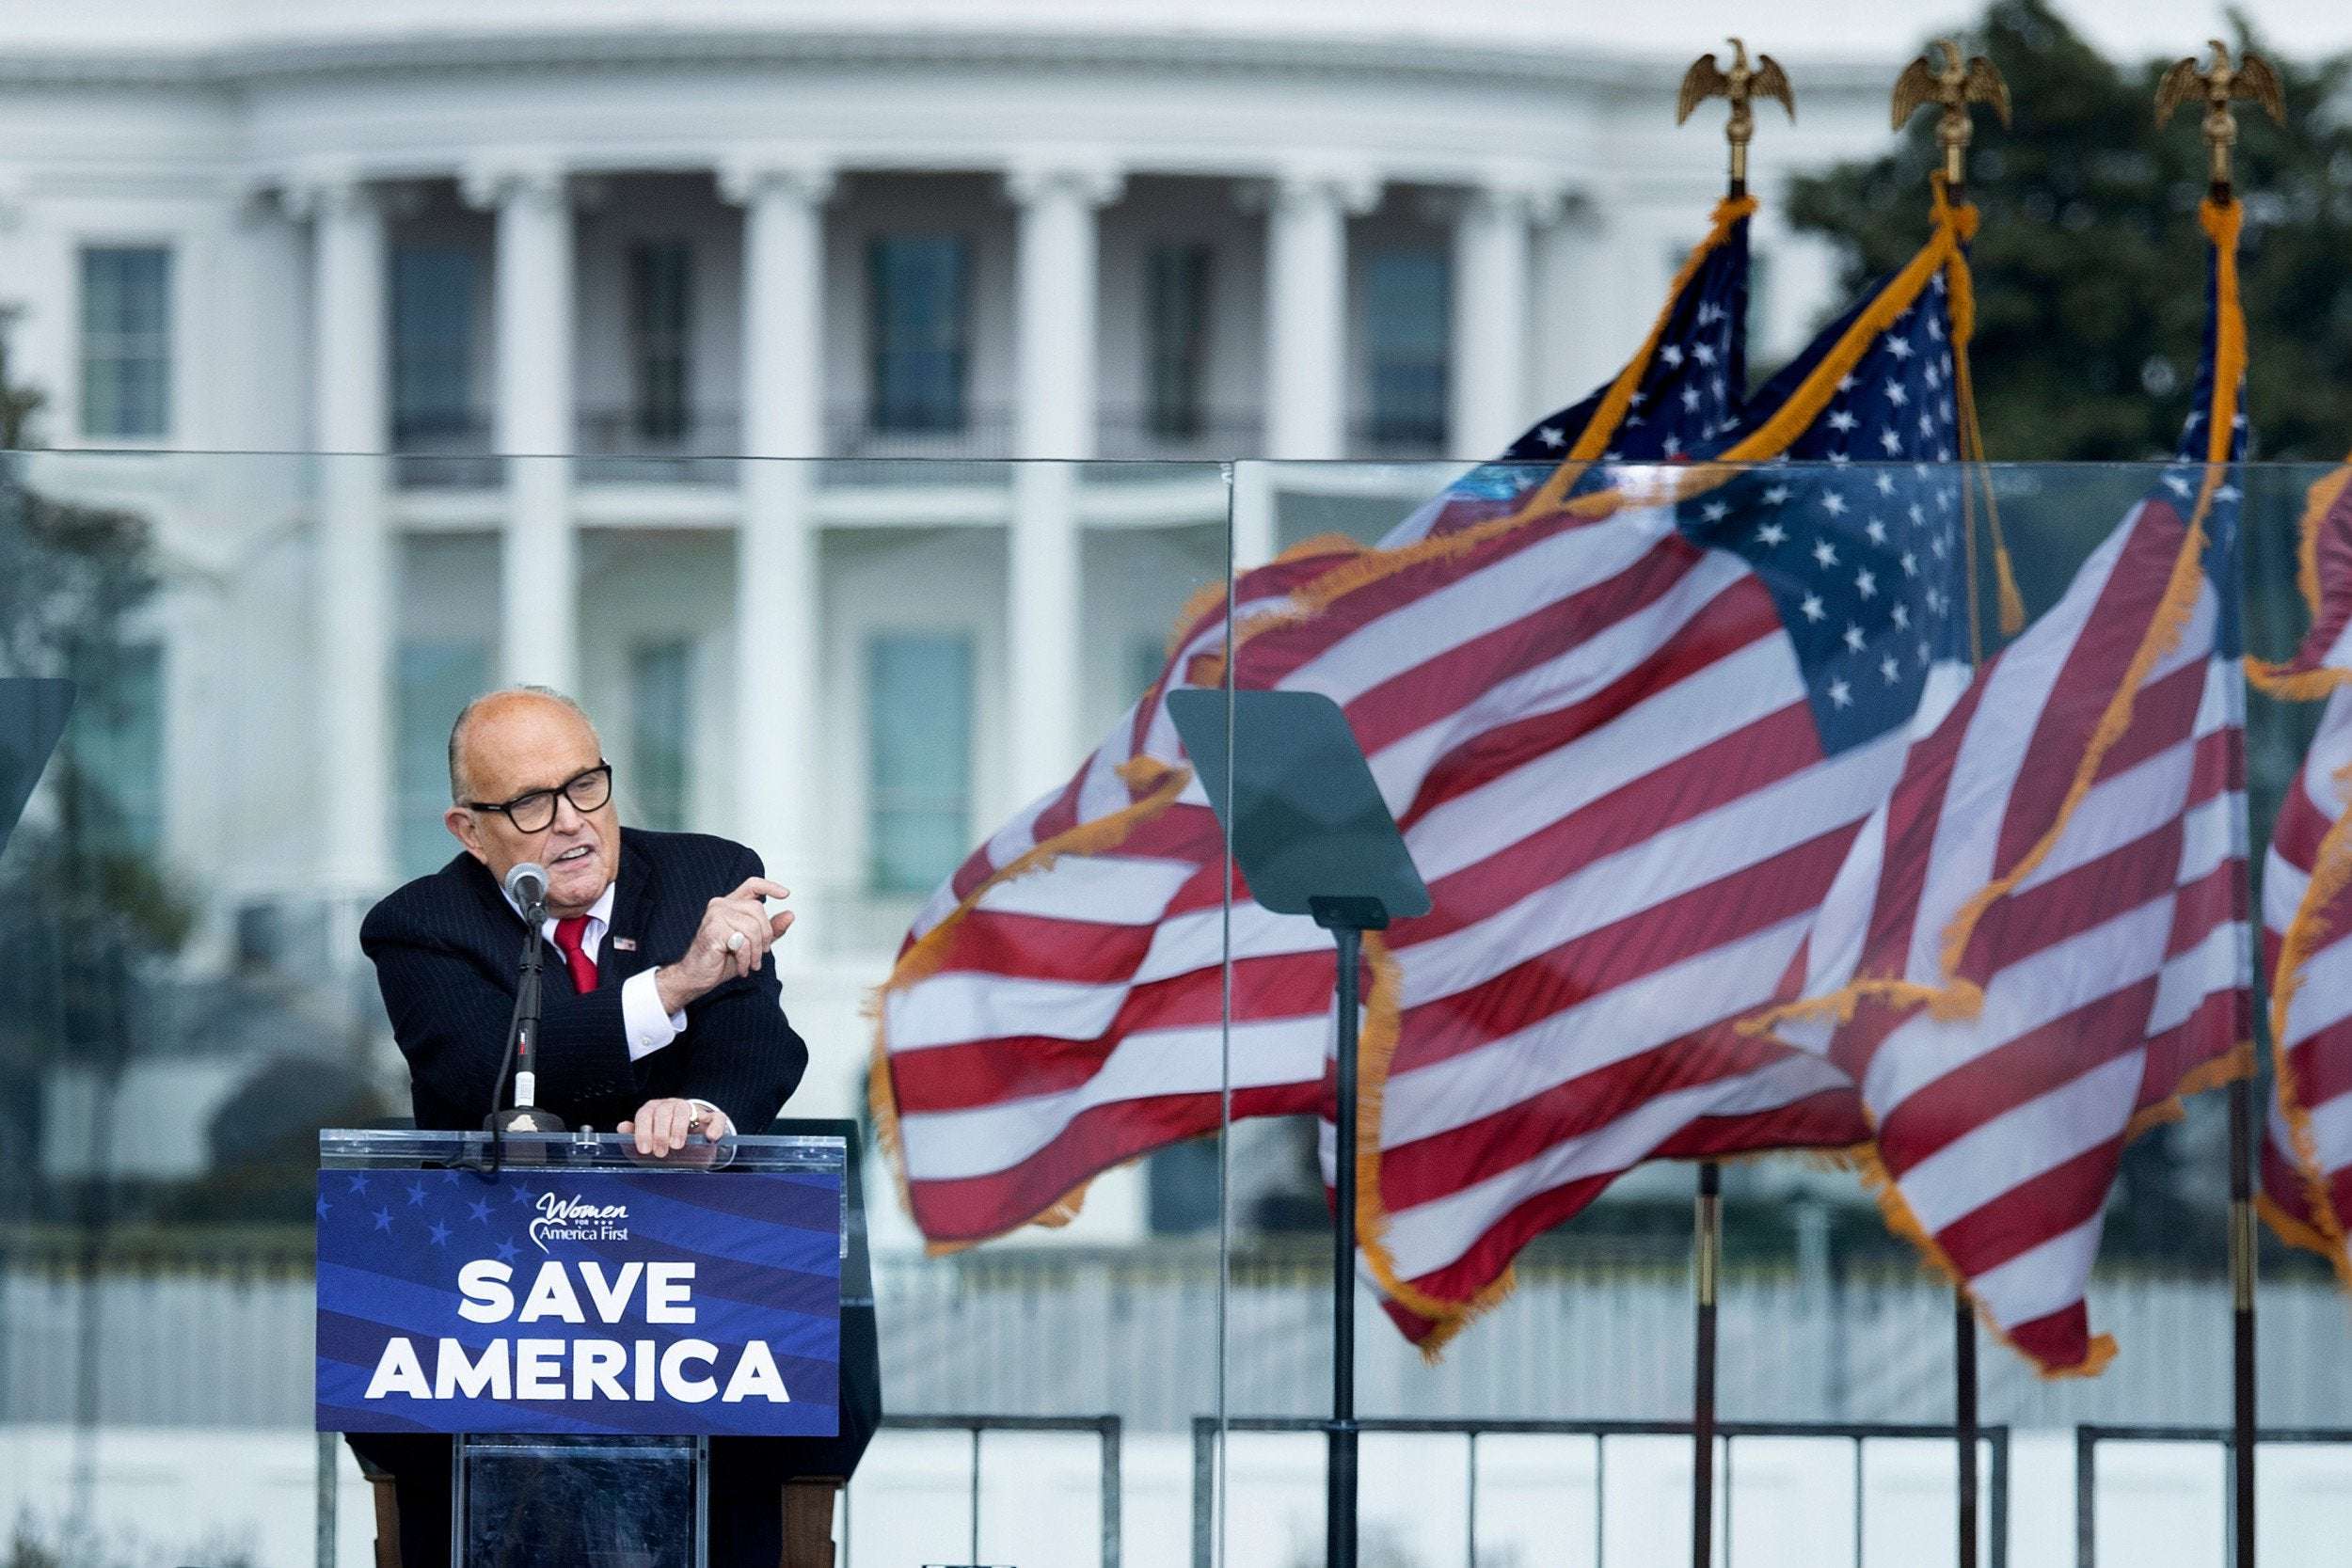 image for Rudy Giuliani Faces Honorary Degree Removal, Accused of 'Fomenting' Capitol Violence